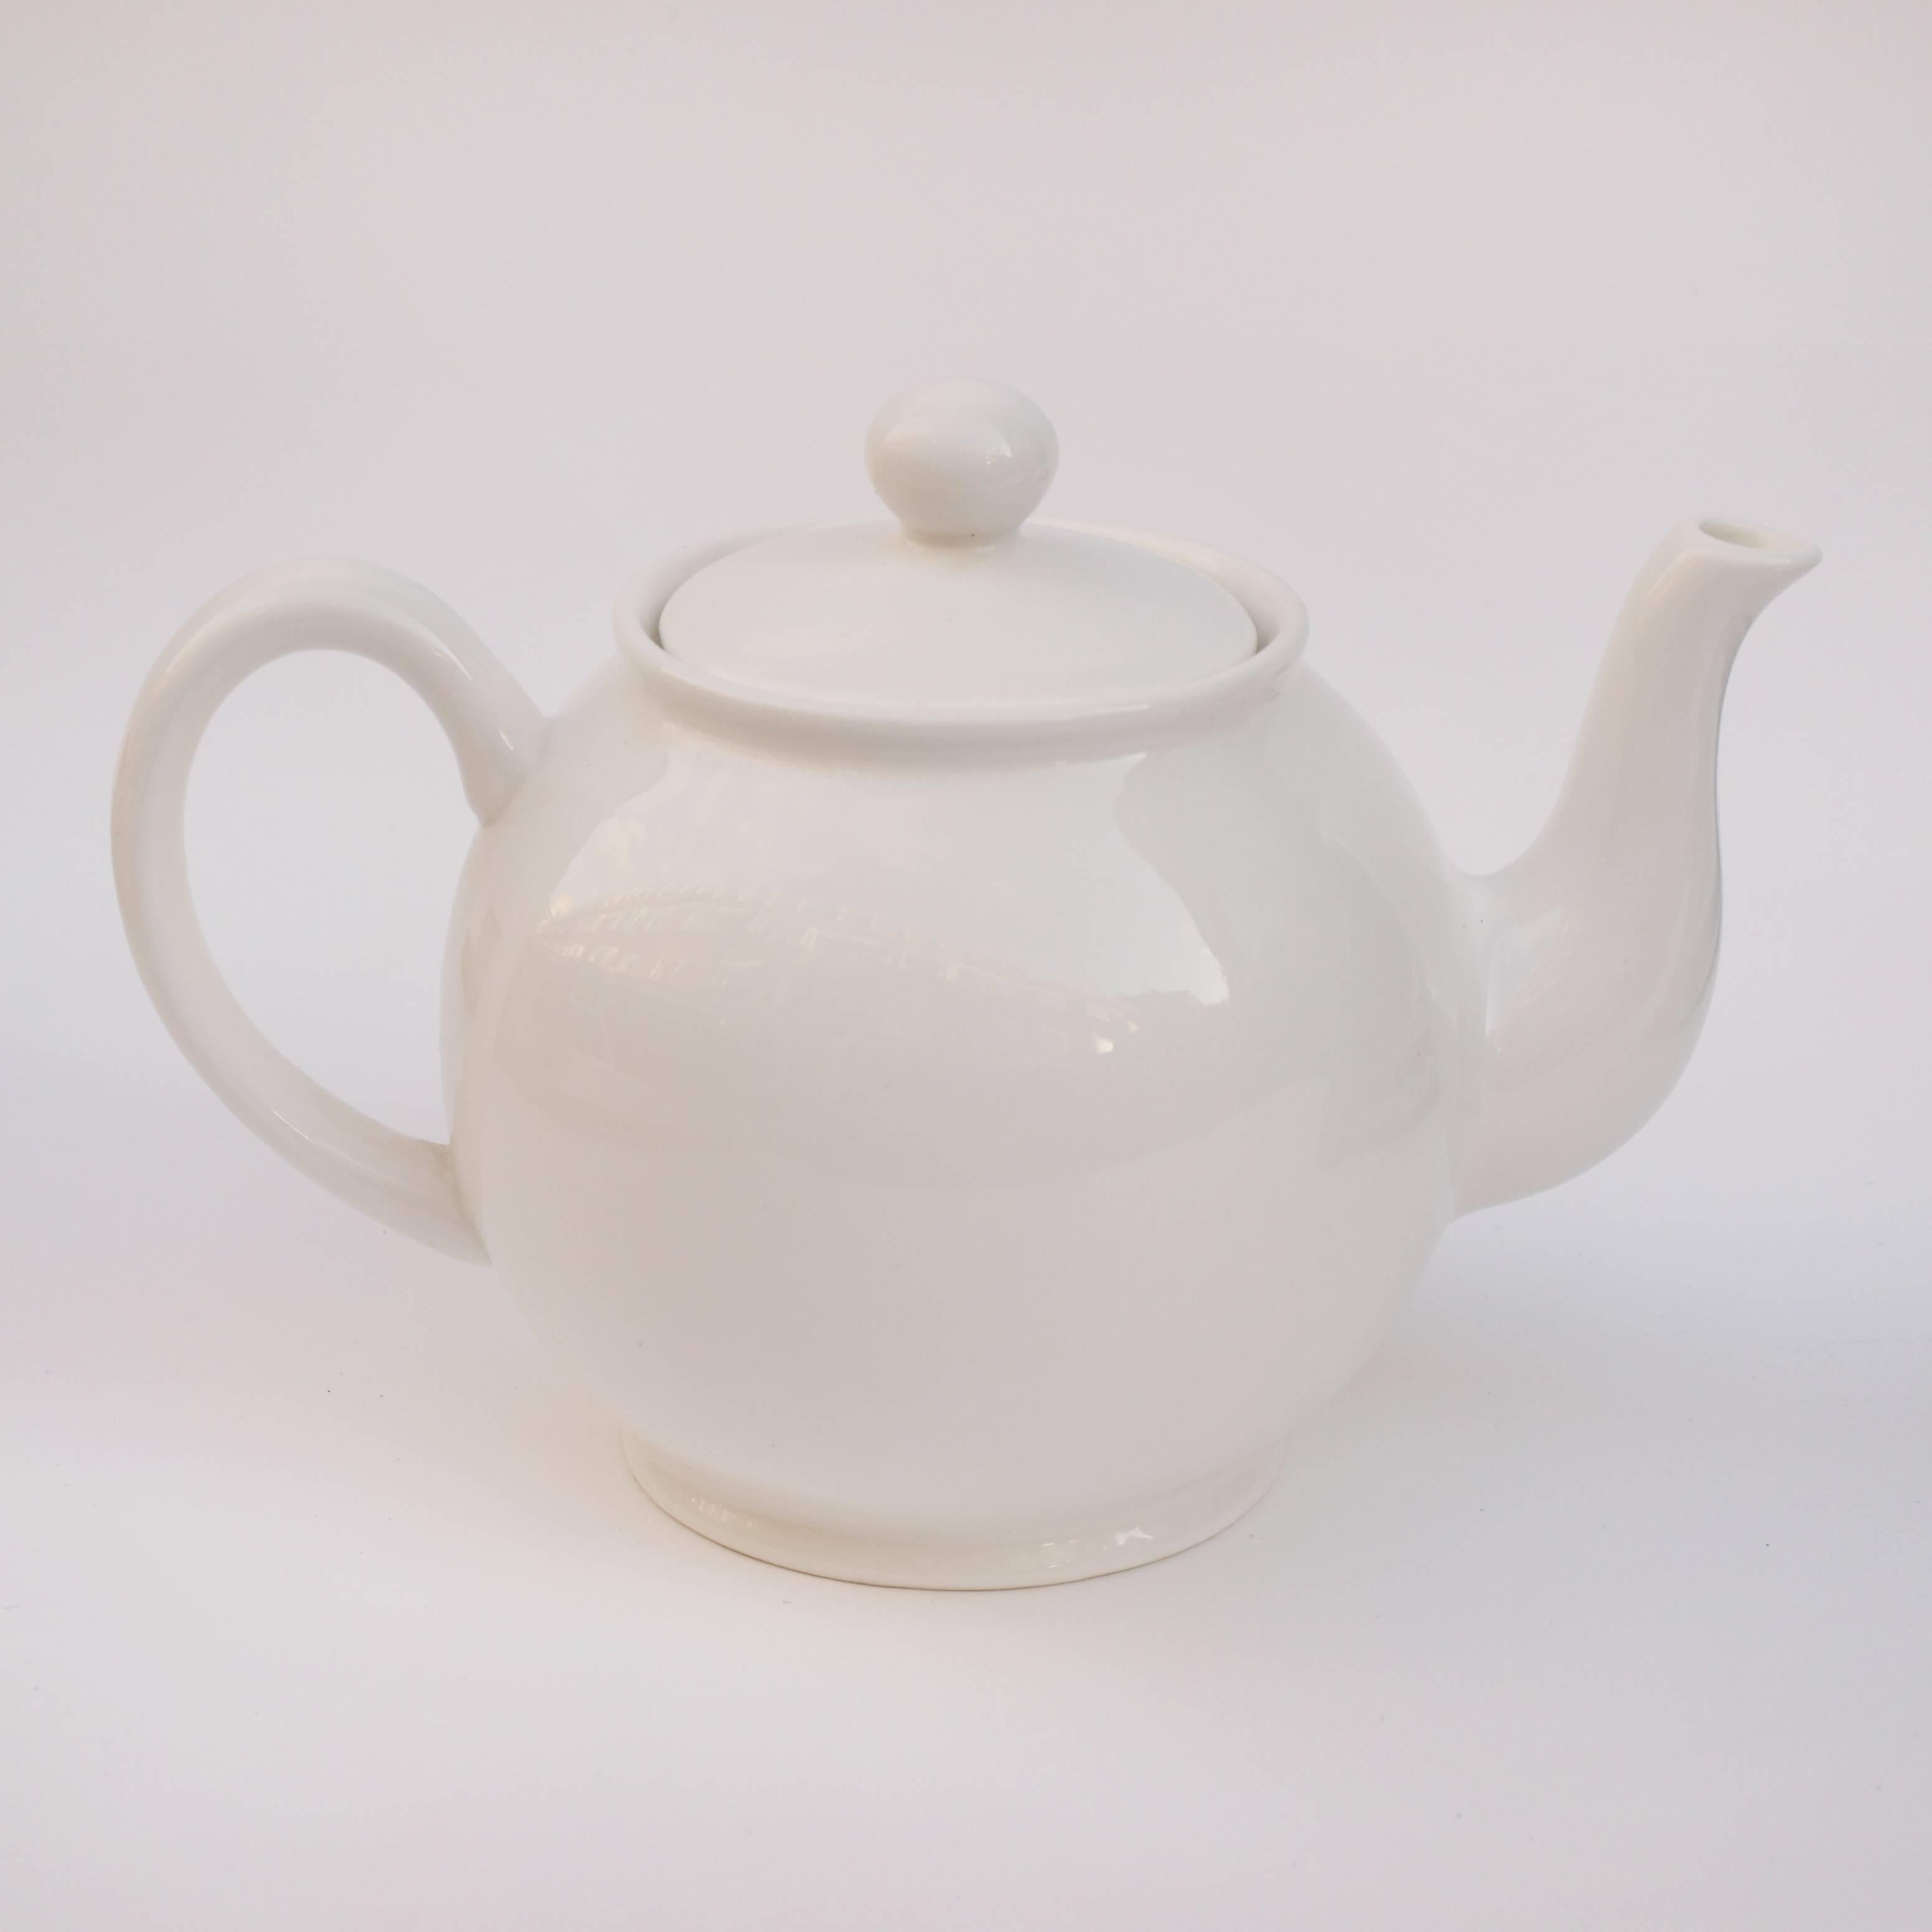 Porcelain Tracey Emin, Foundlings and Fledglings, Our Angels of This Earth, Teapot, 2007